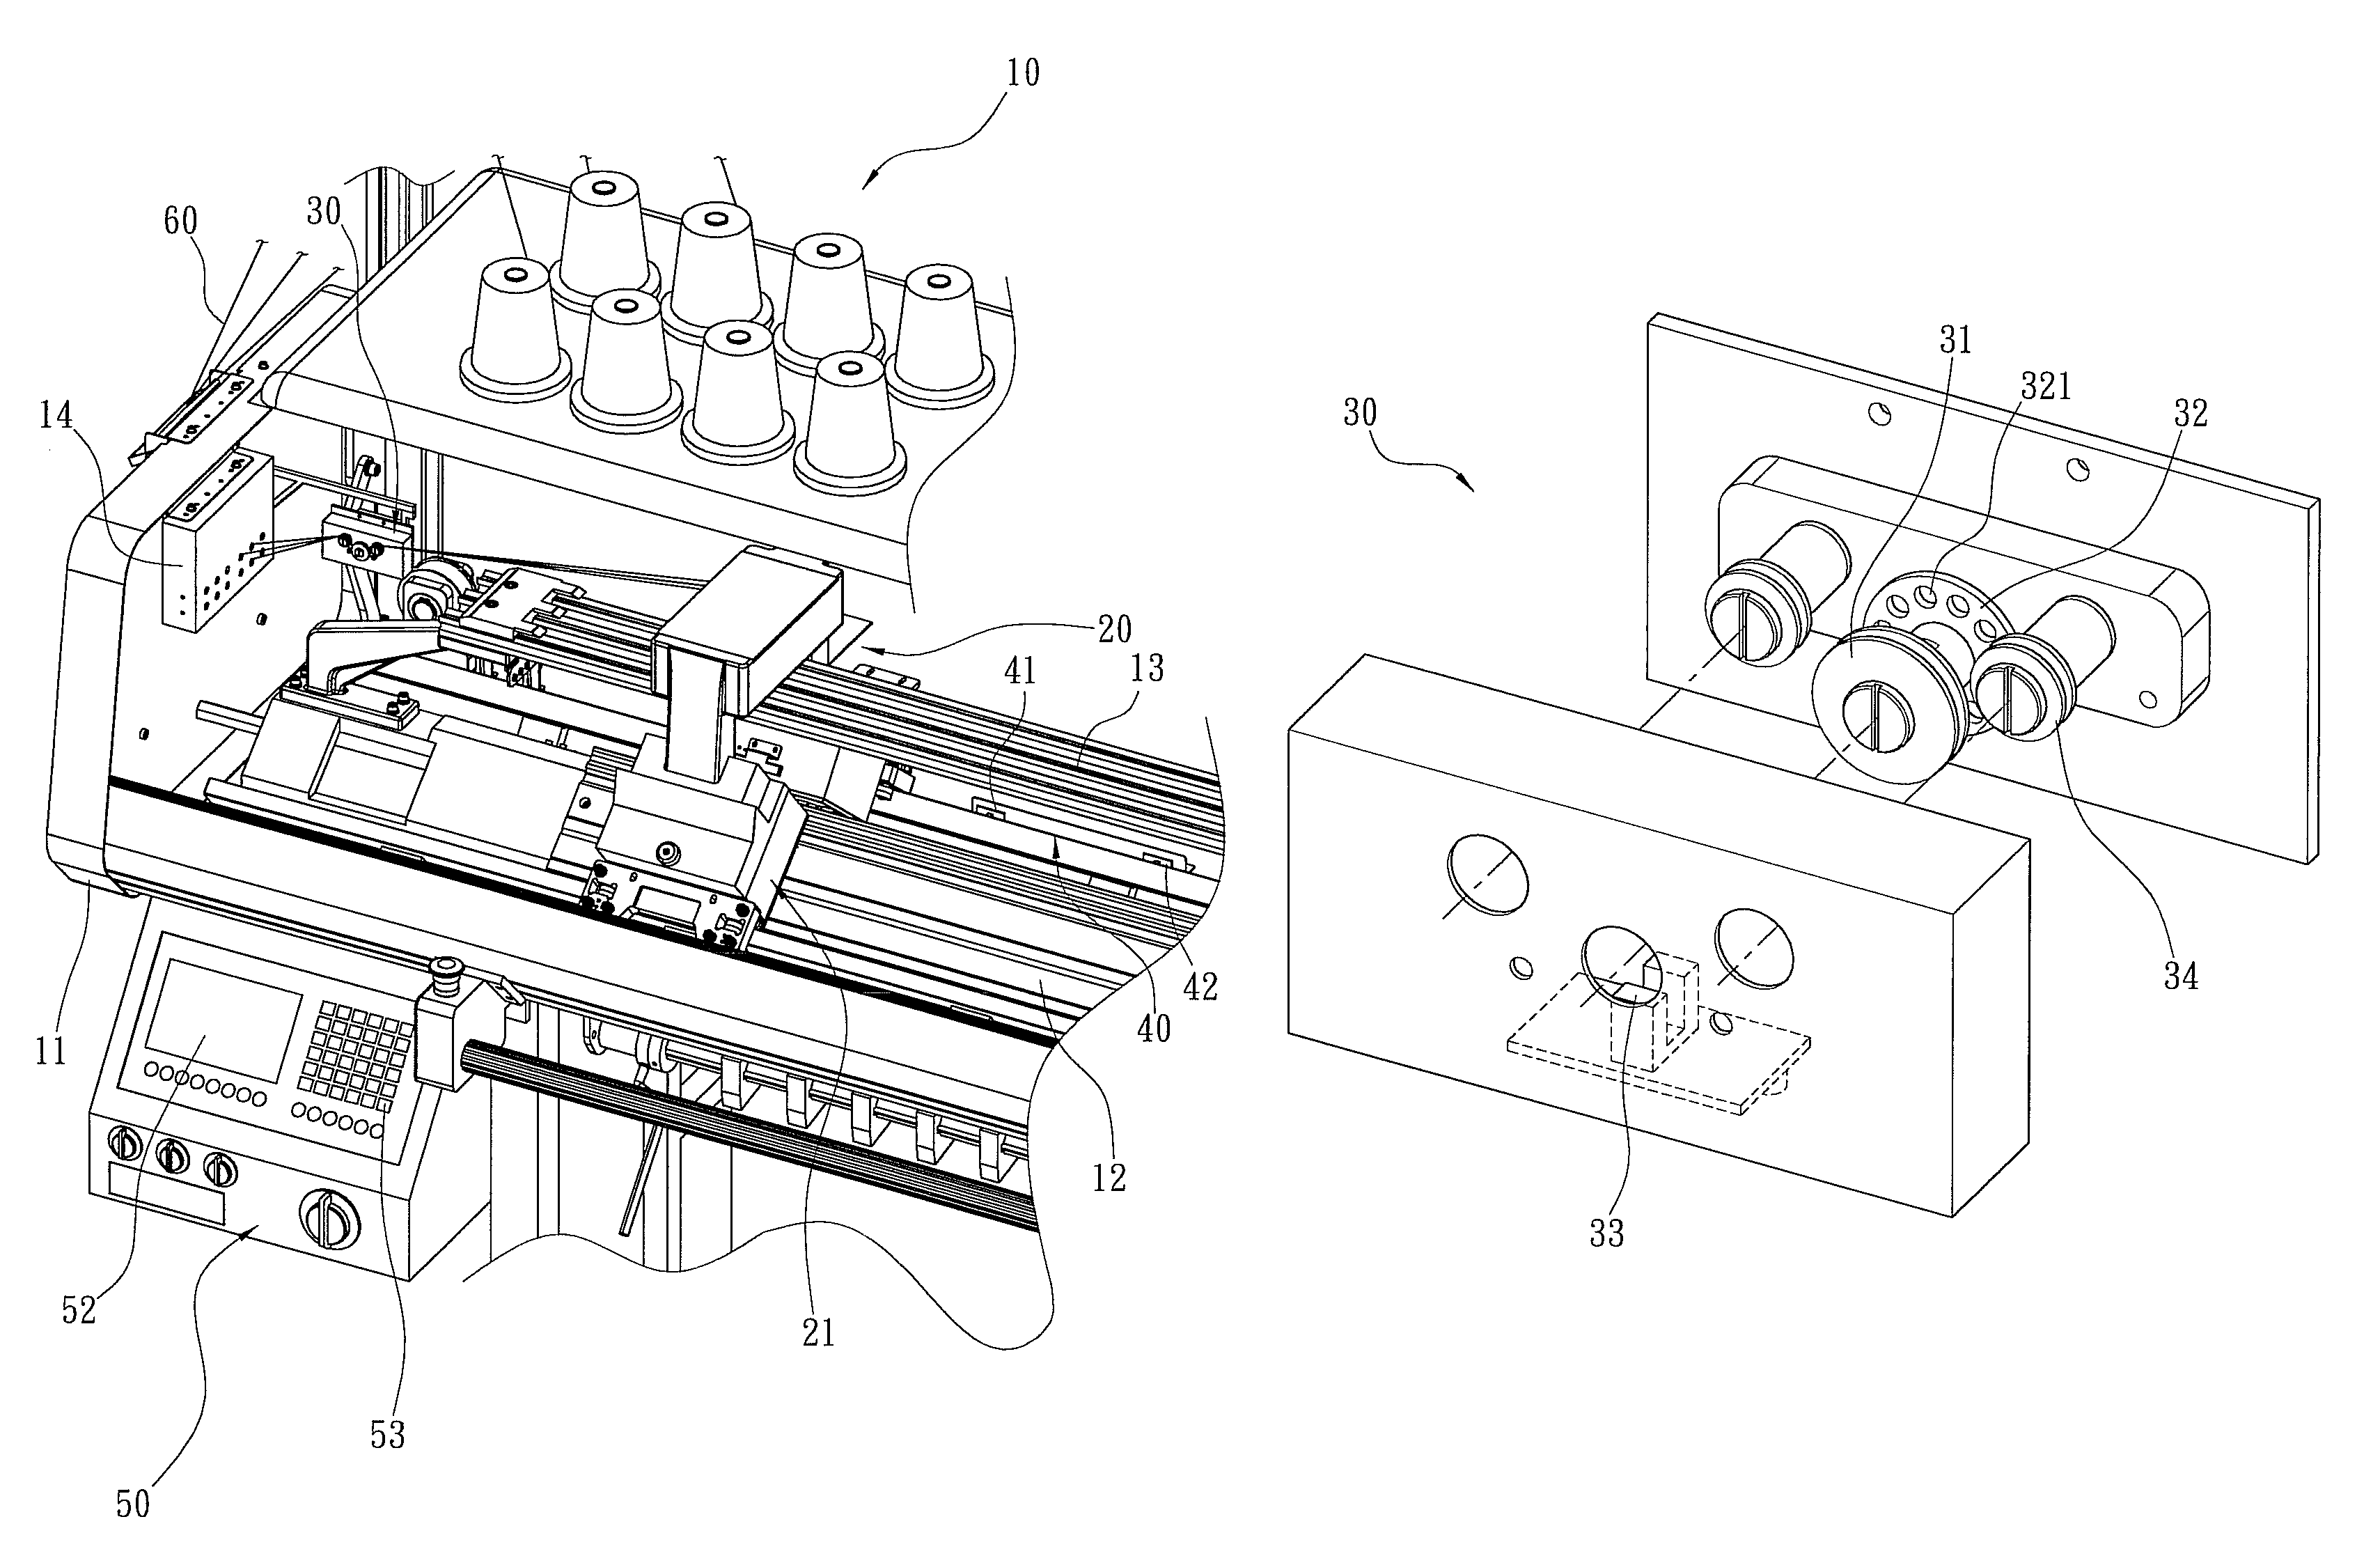 Yarn measuring device for flat bed knitting machines